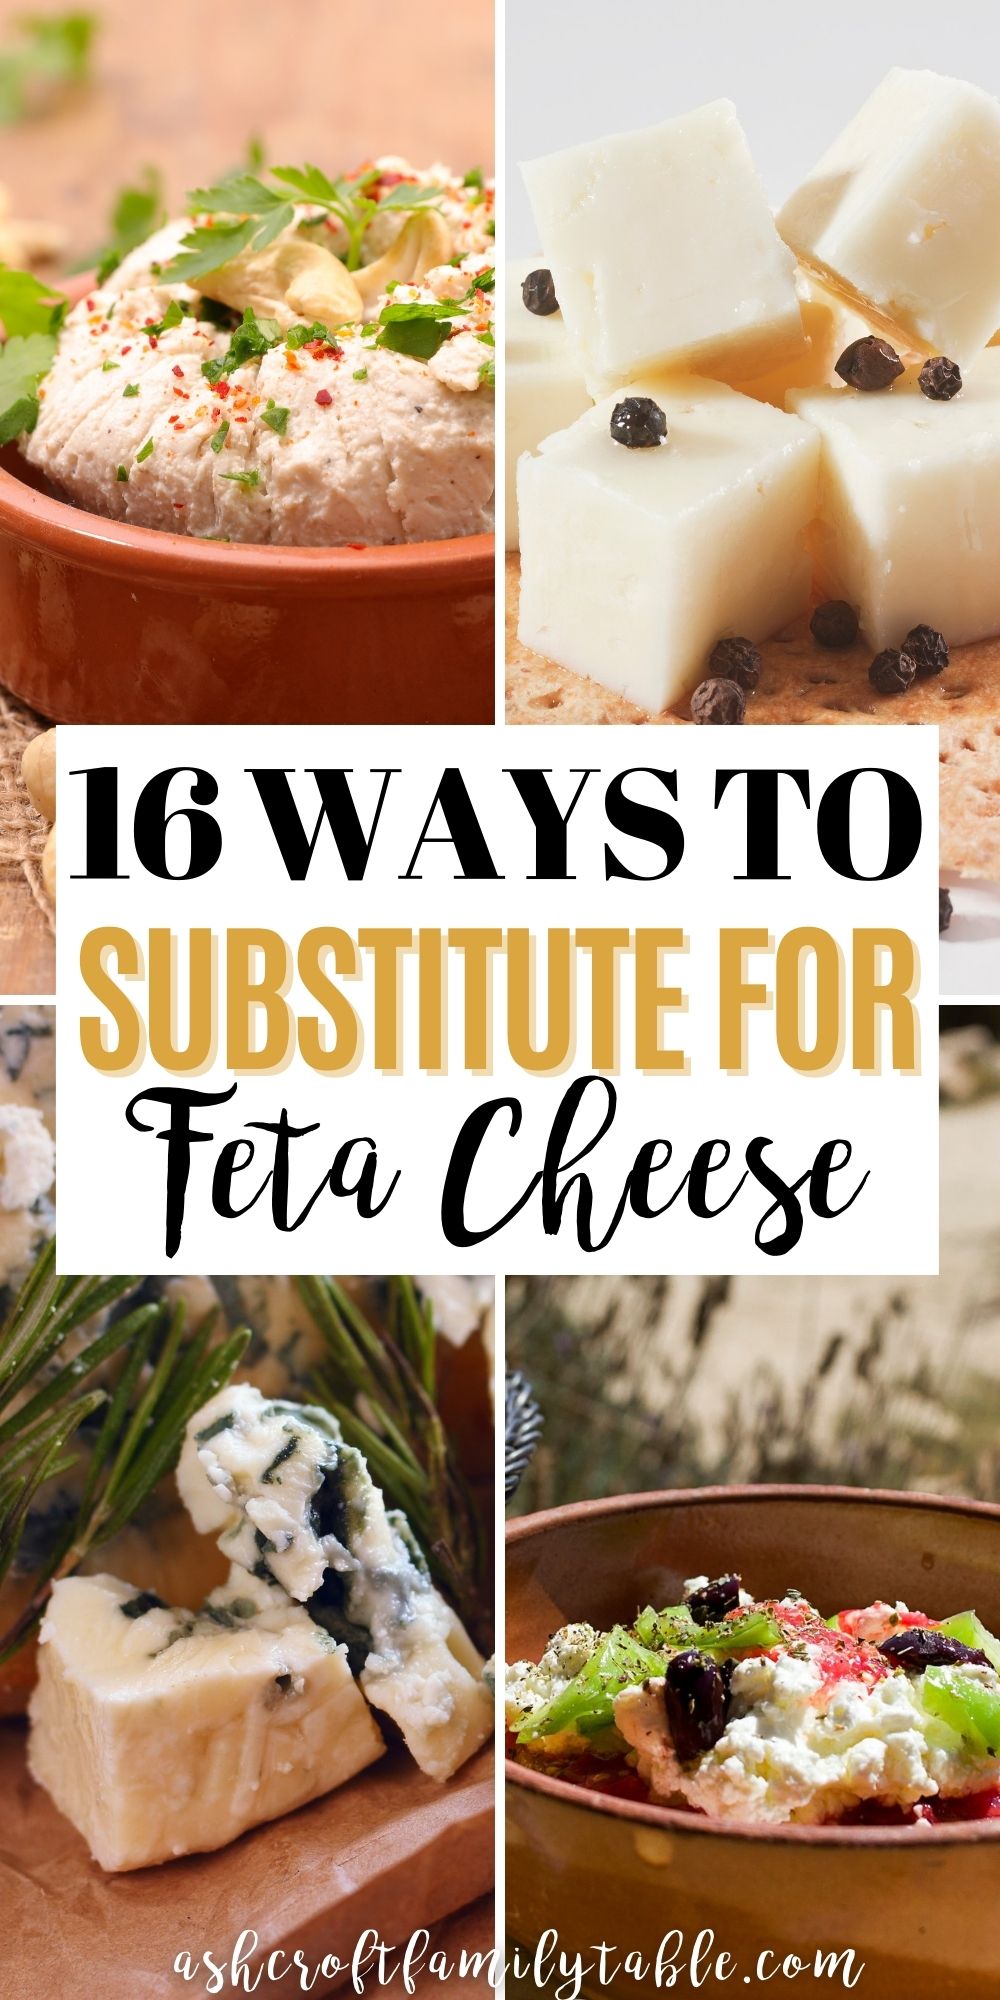 Pinterest graphic with text and collage of ingredients used to substitute for feta cheese.